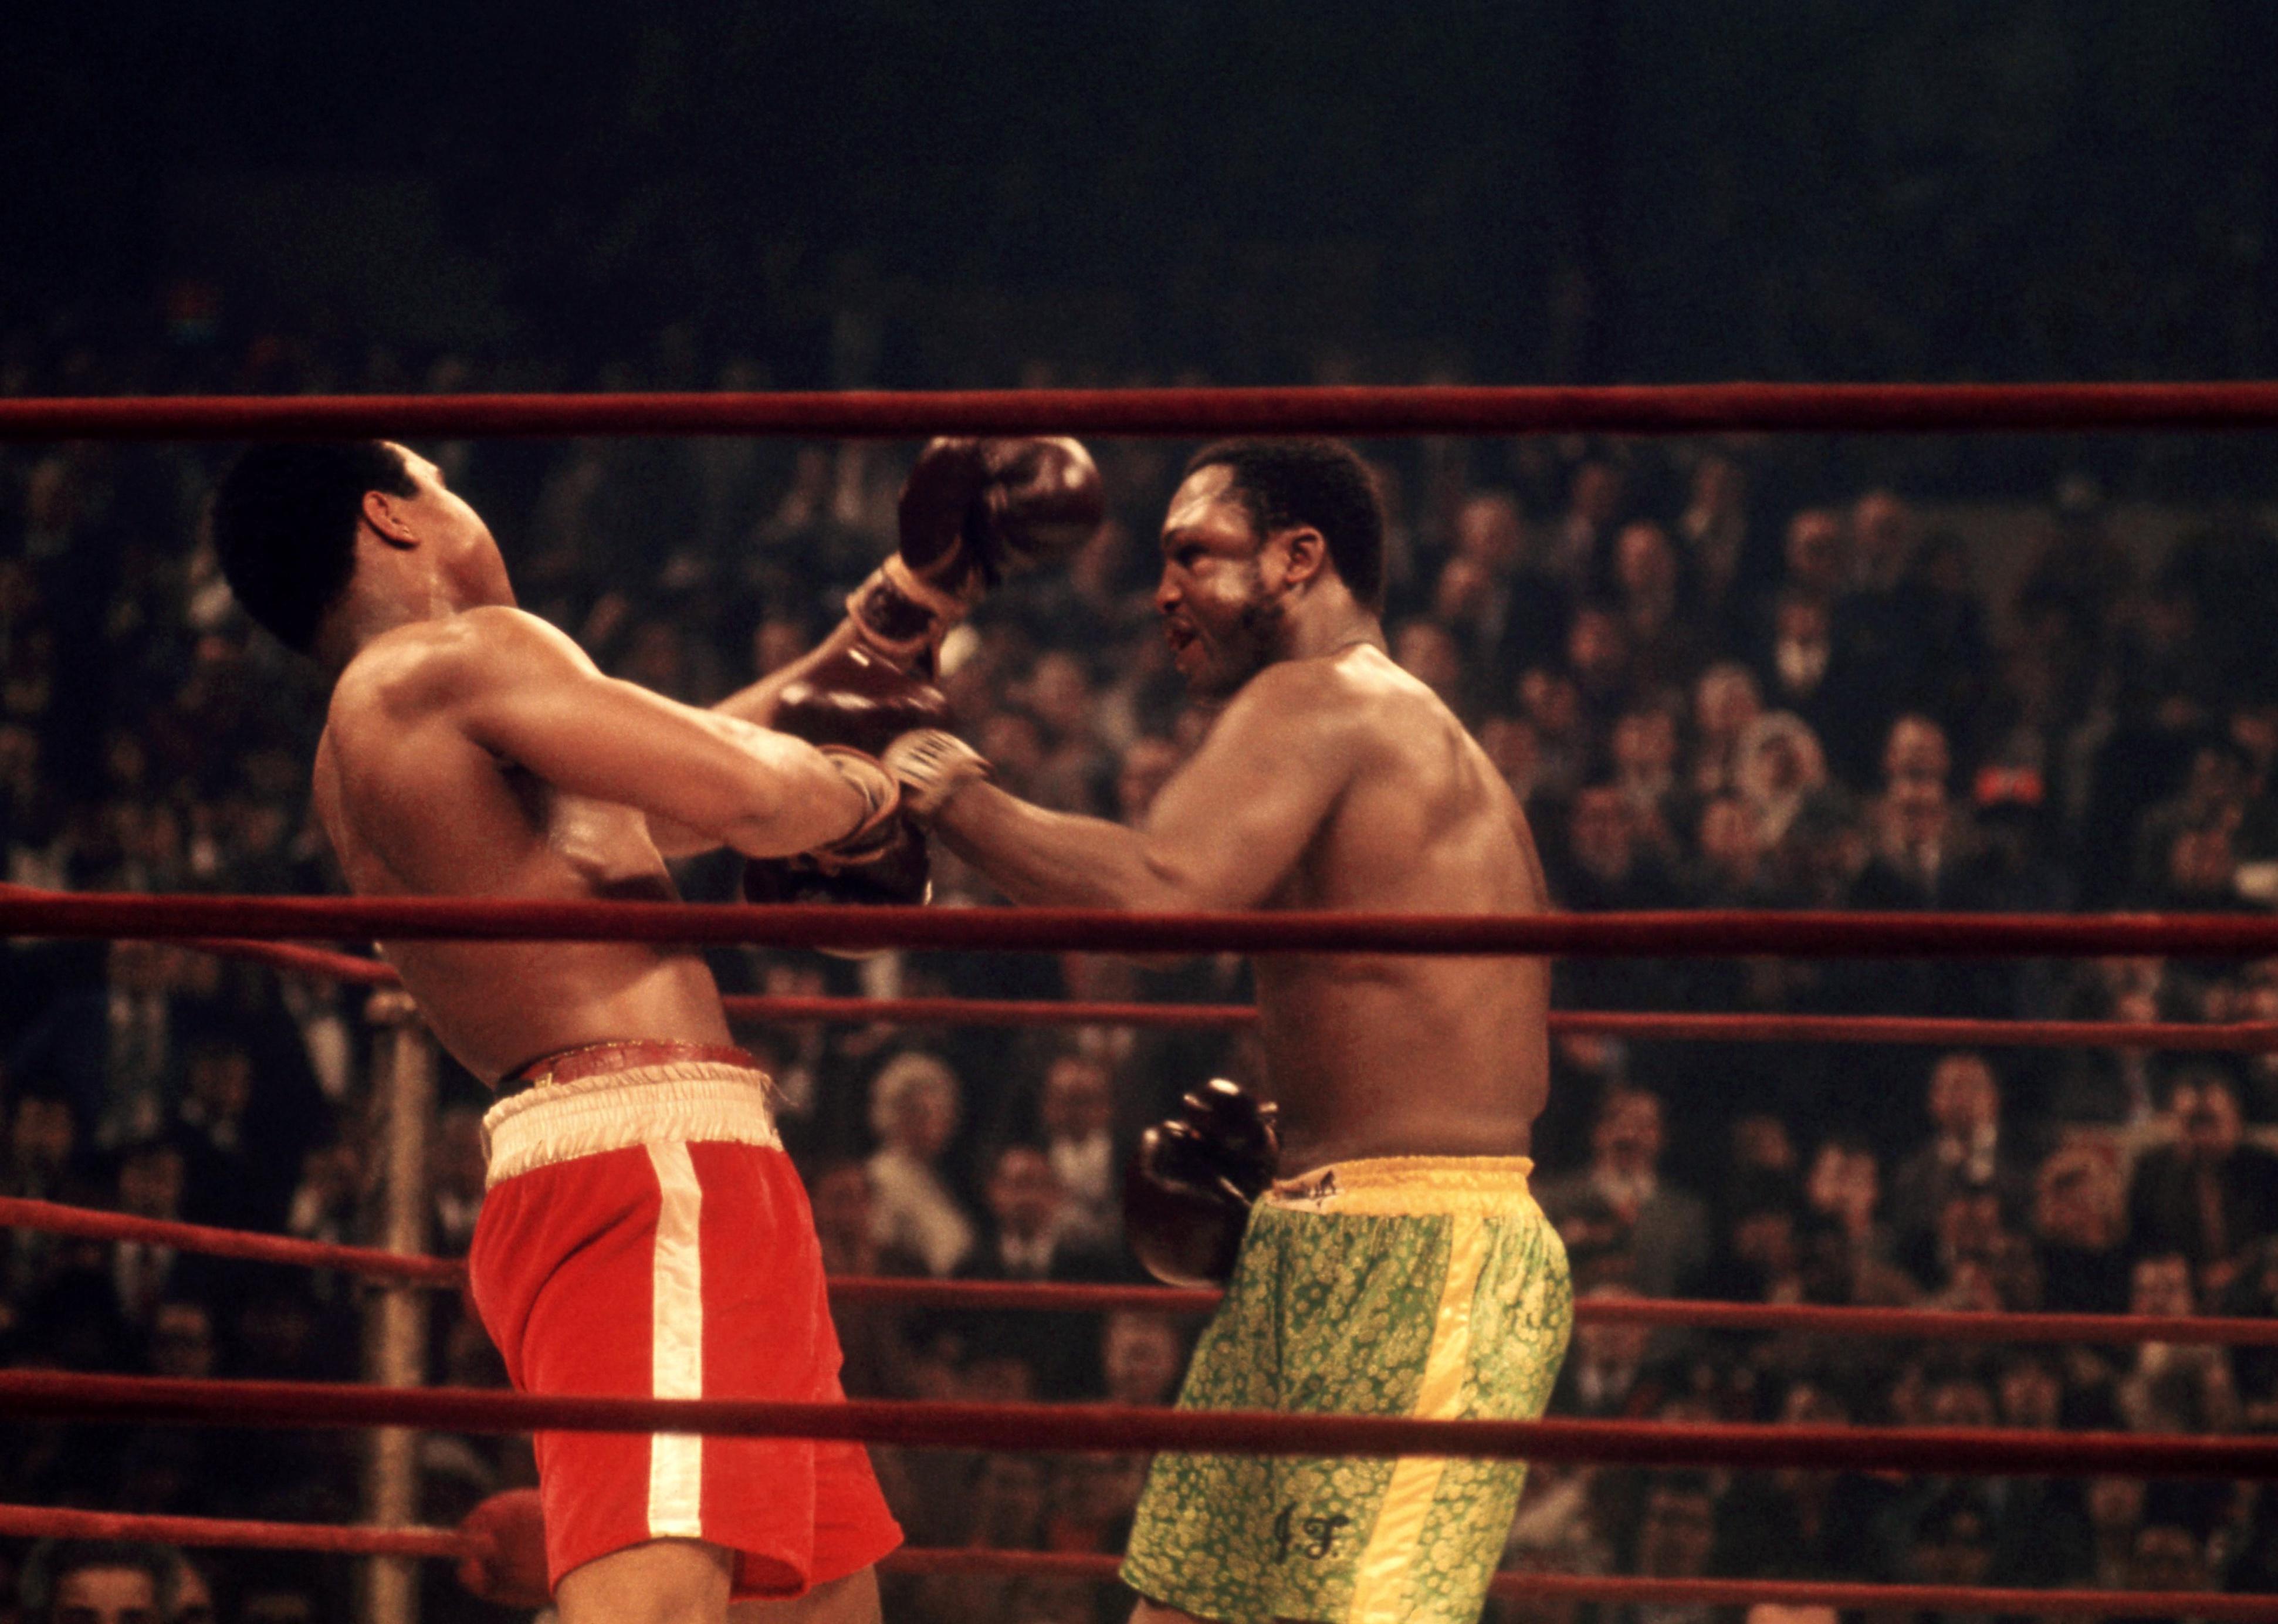 Muhammad Ali takes a punch from Joe Frazier during their 